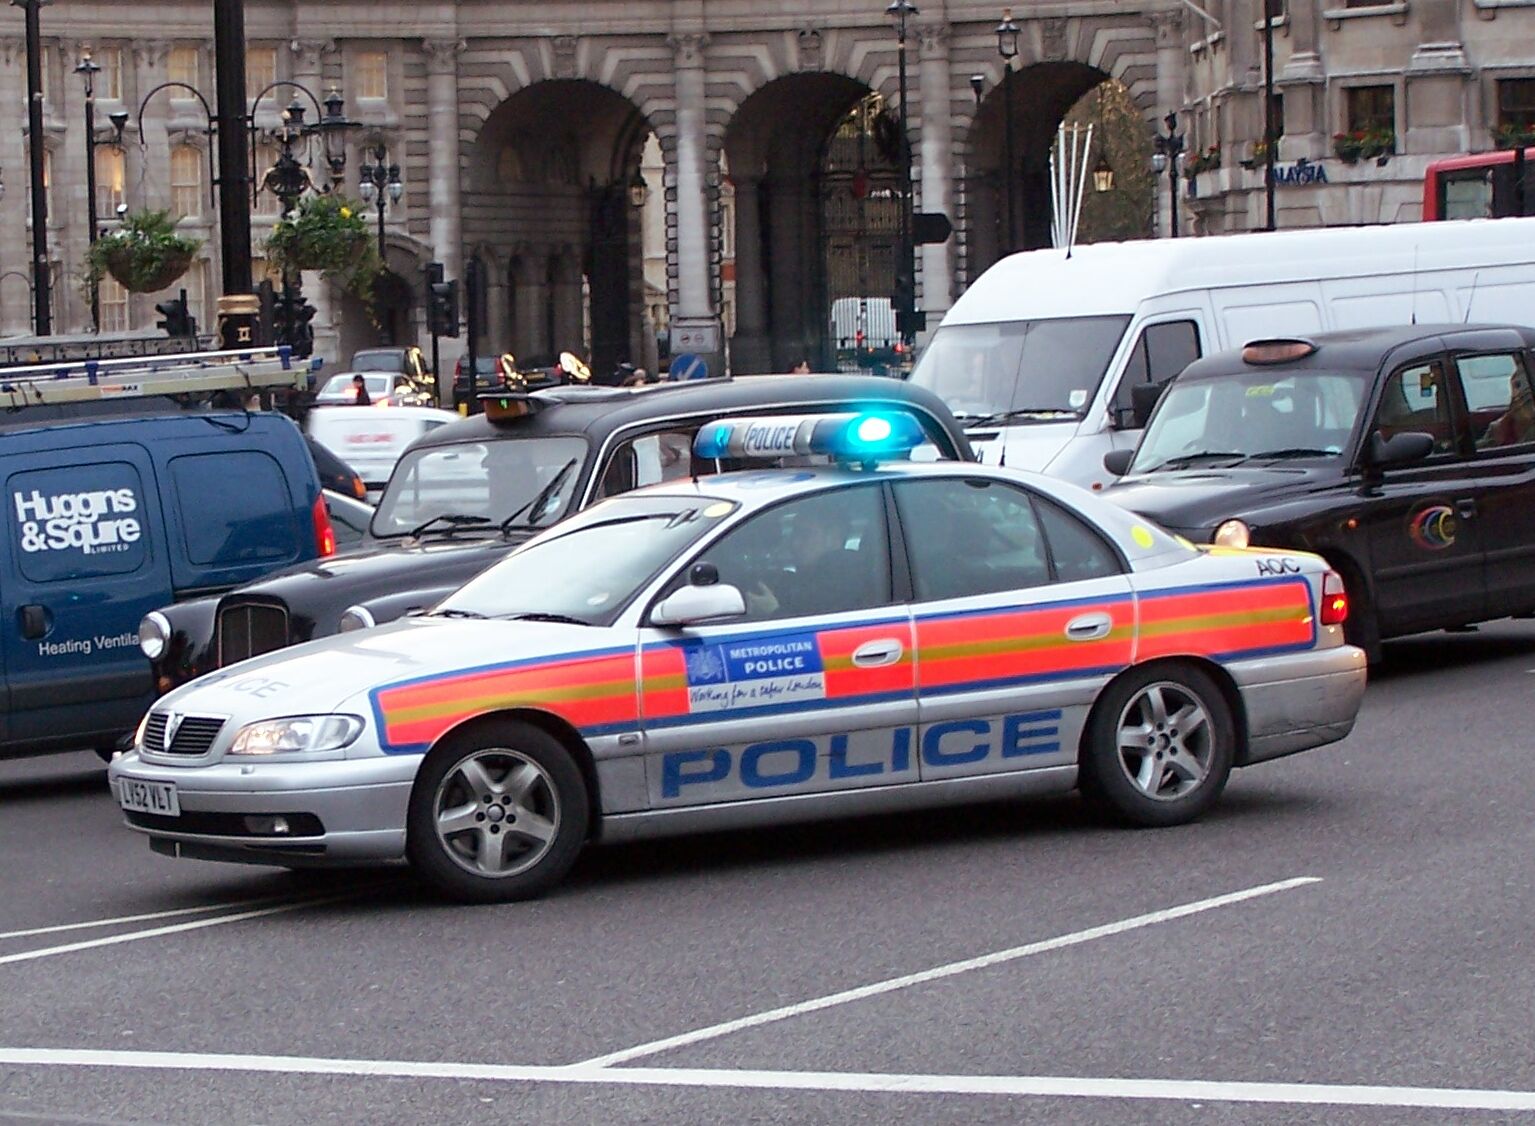 Police Stations near Euston Station in London